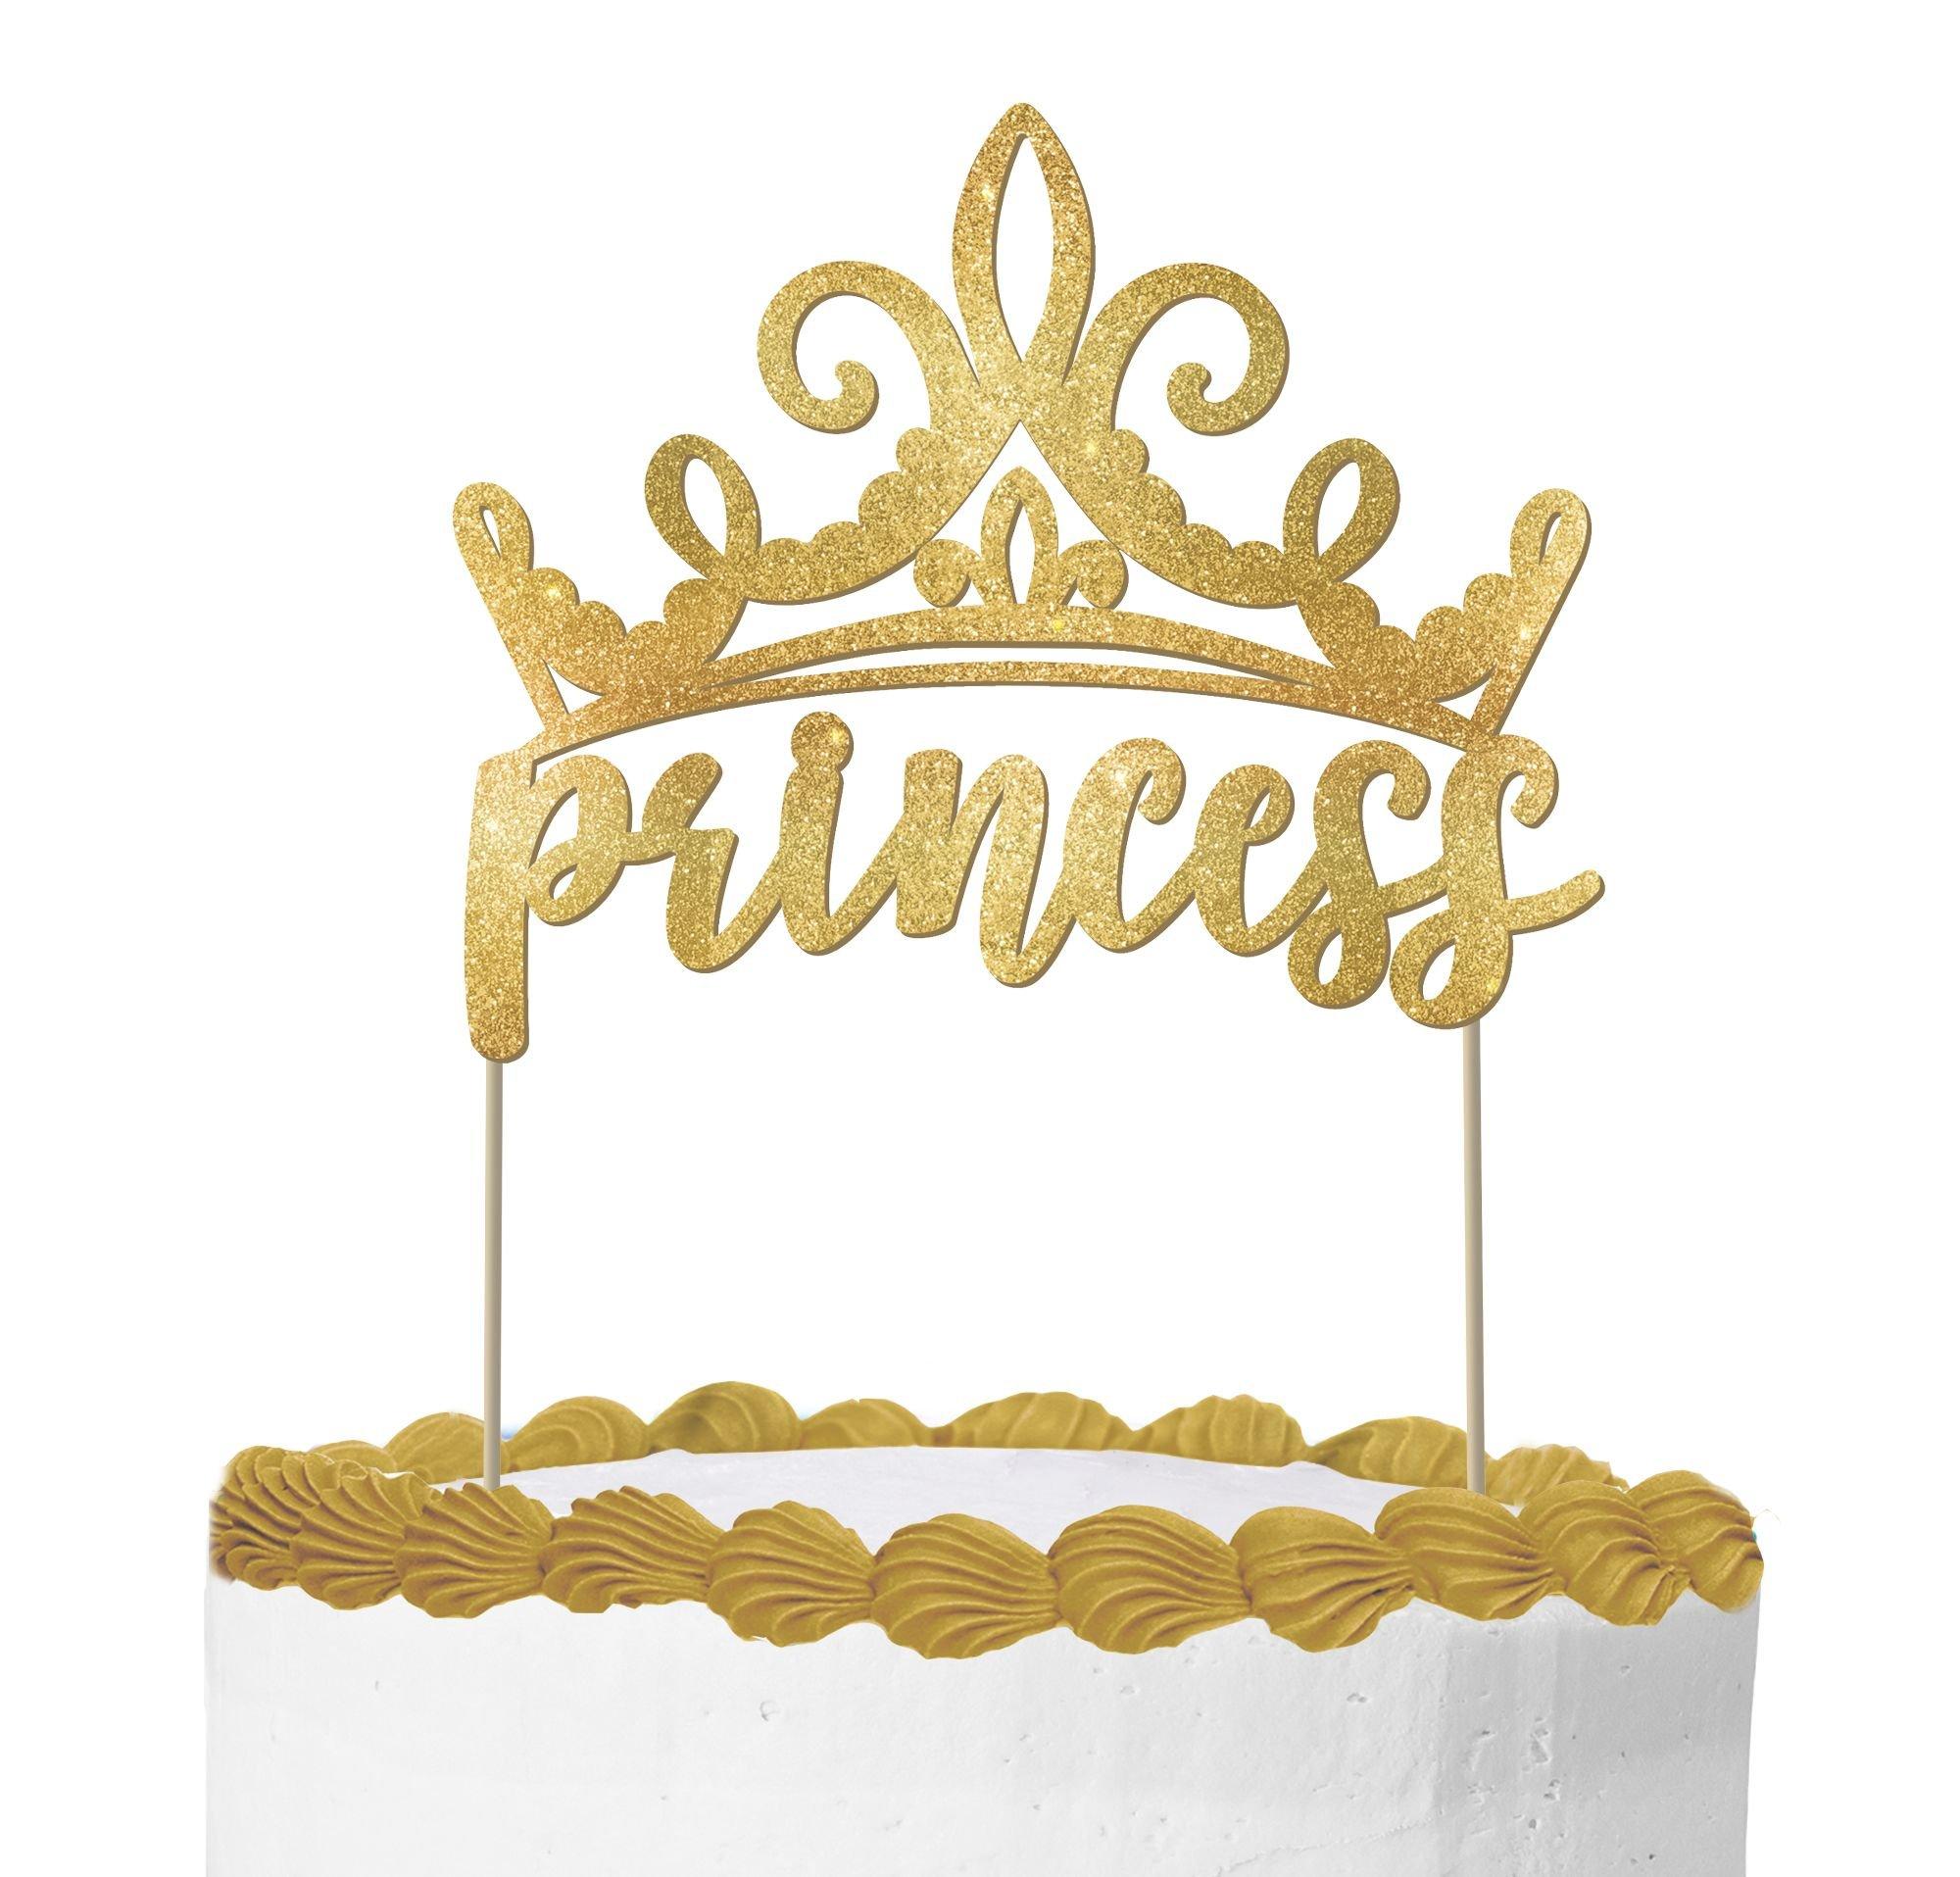 Glitter Disney Once Upon a Time Princess Cake Topper